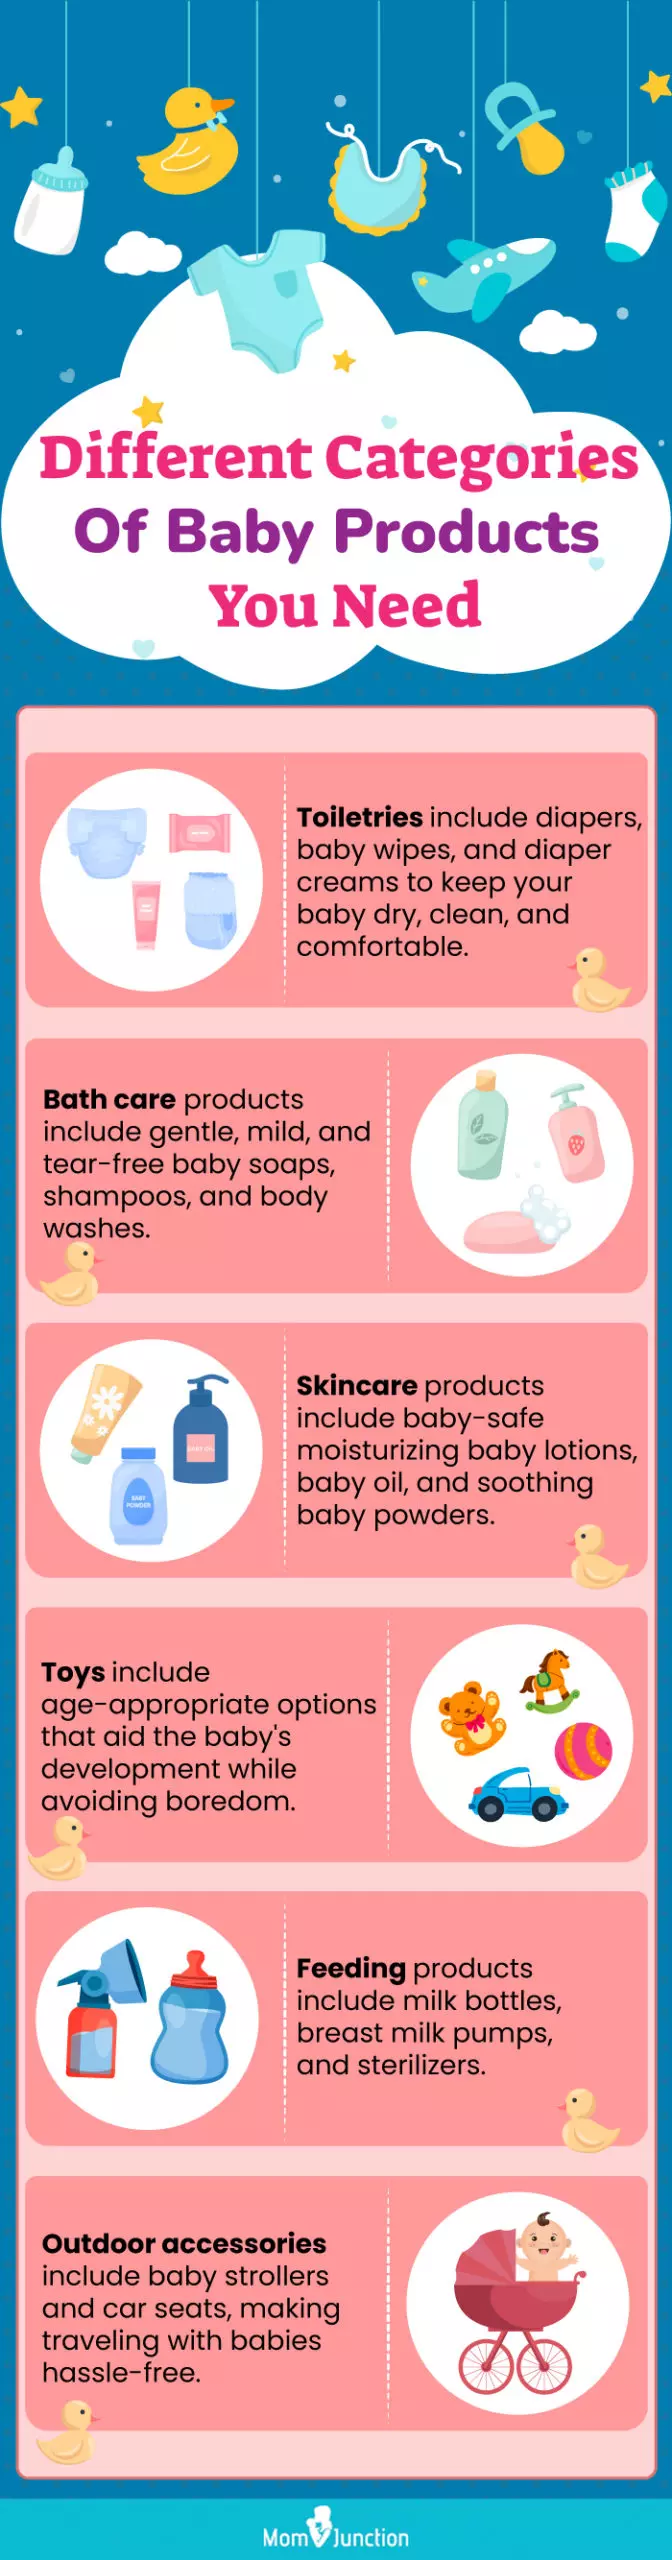 Different Categories Of Baby Products You Need (infographic)